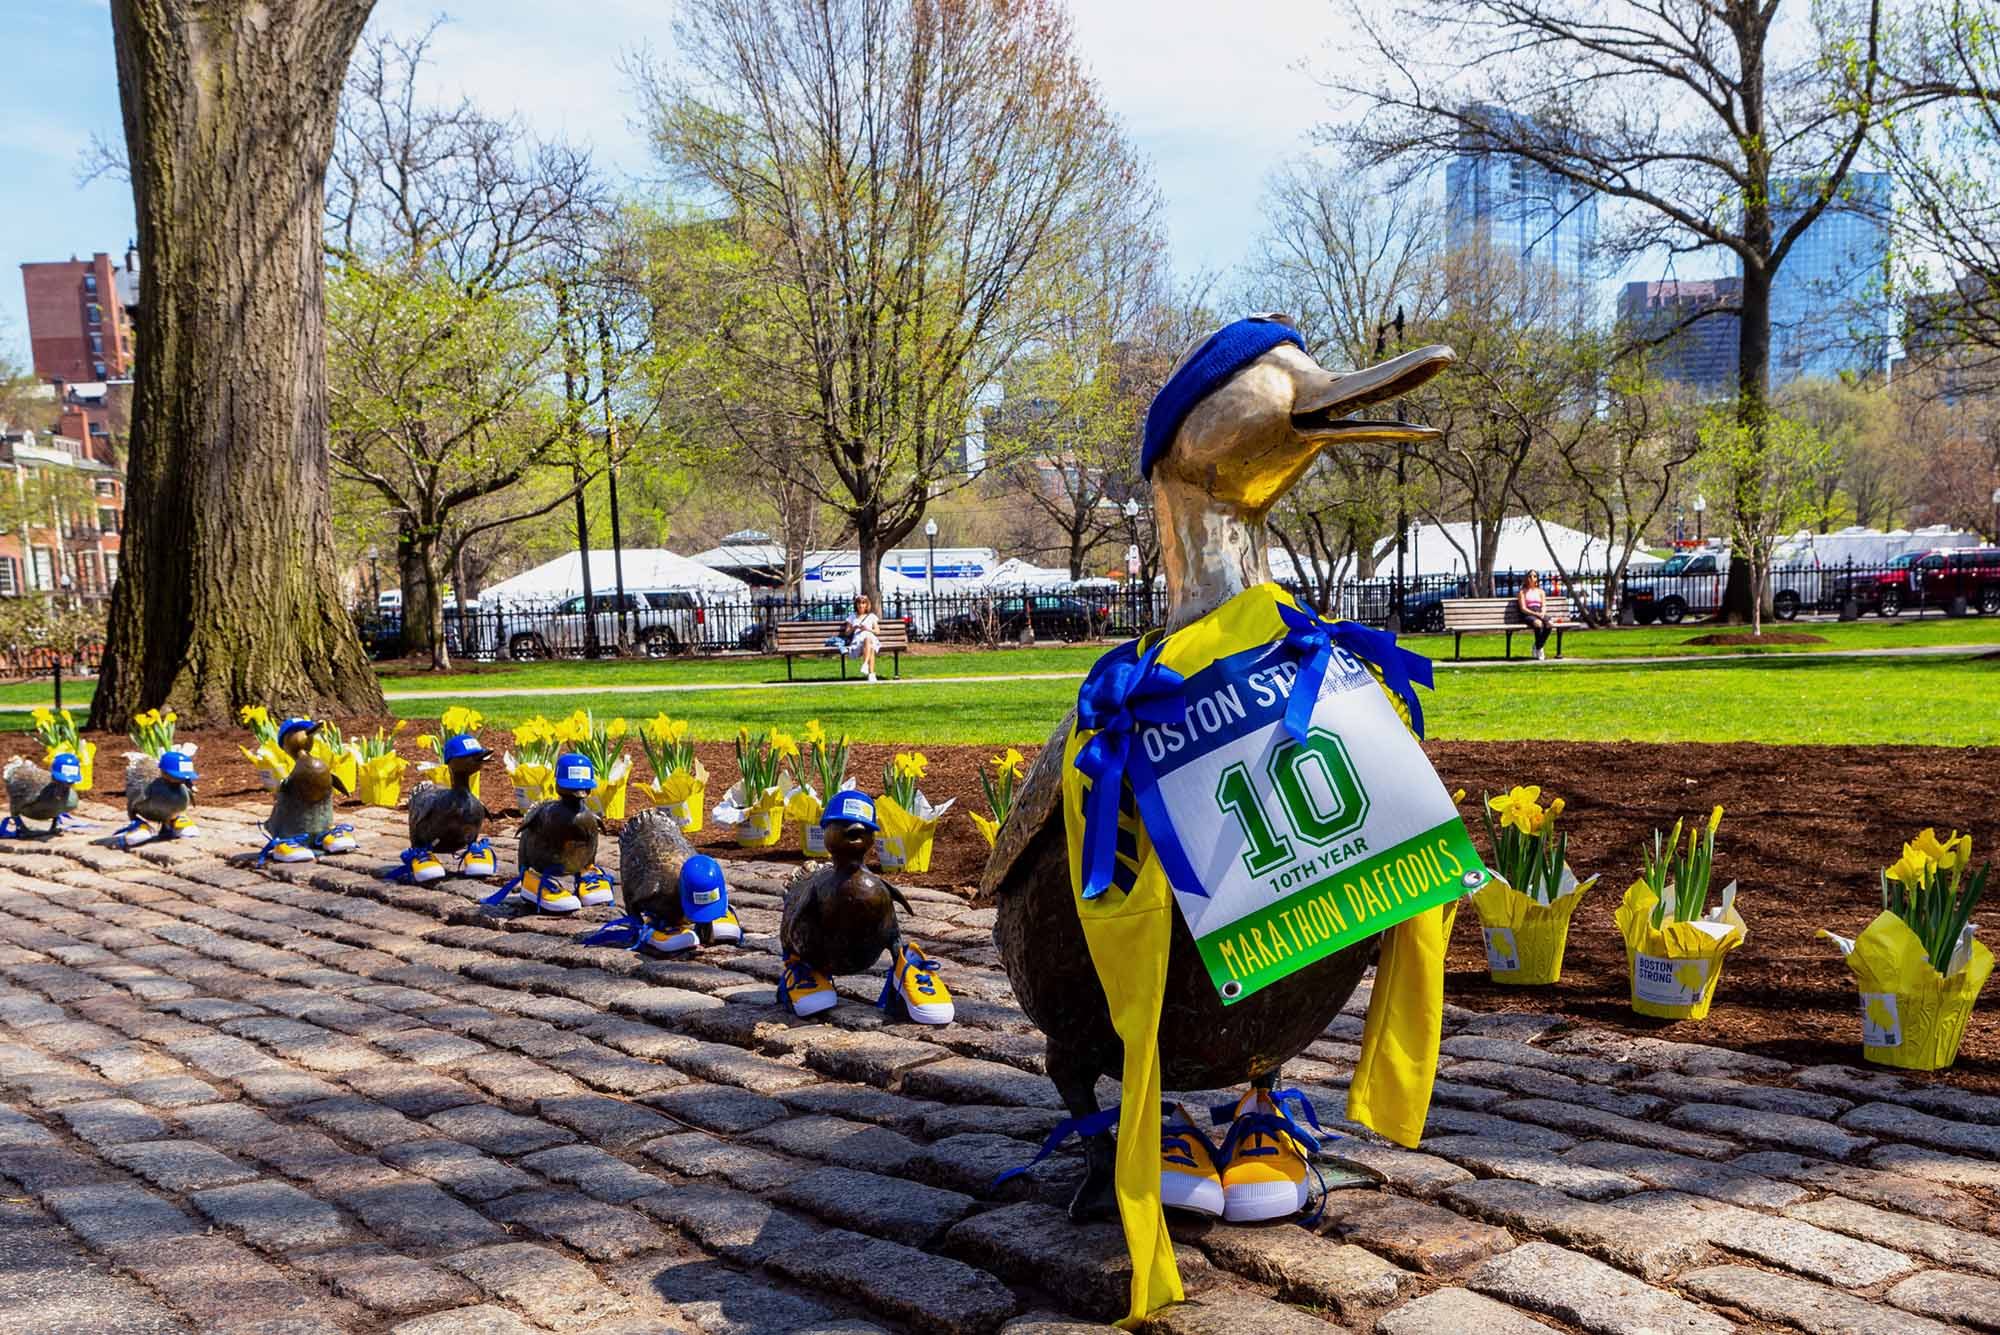 Photo: A picture of duck statues at the Boston Common wearing Boston Marathon gear